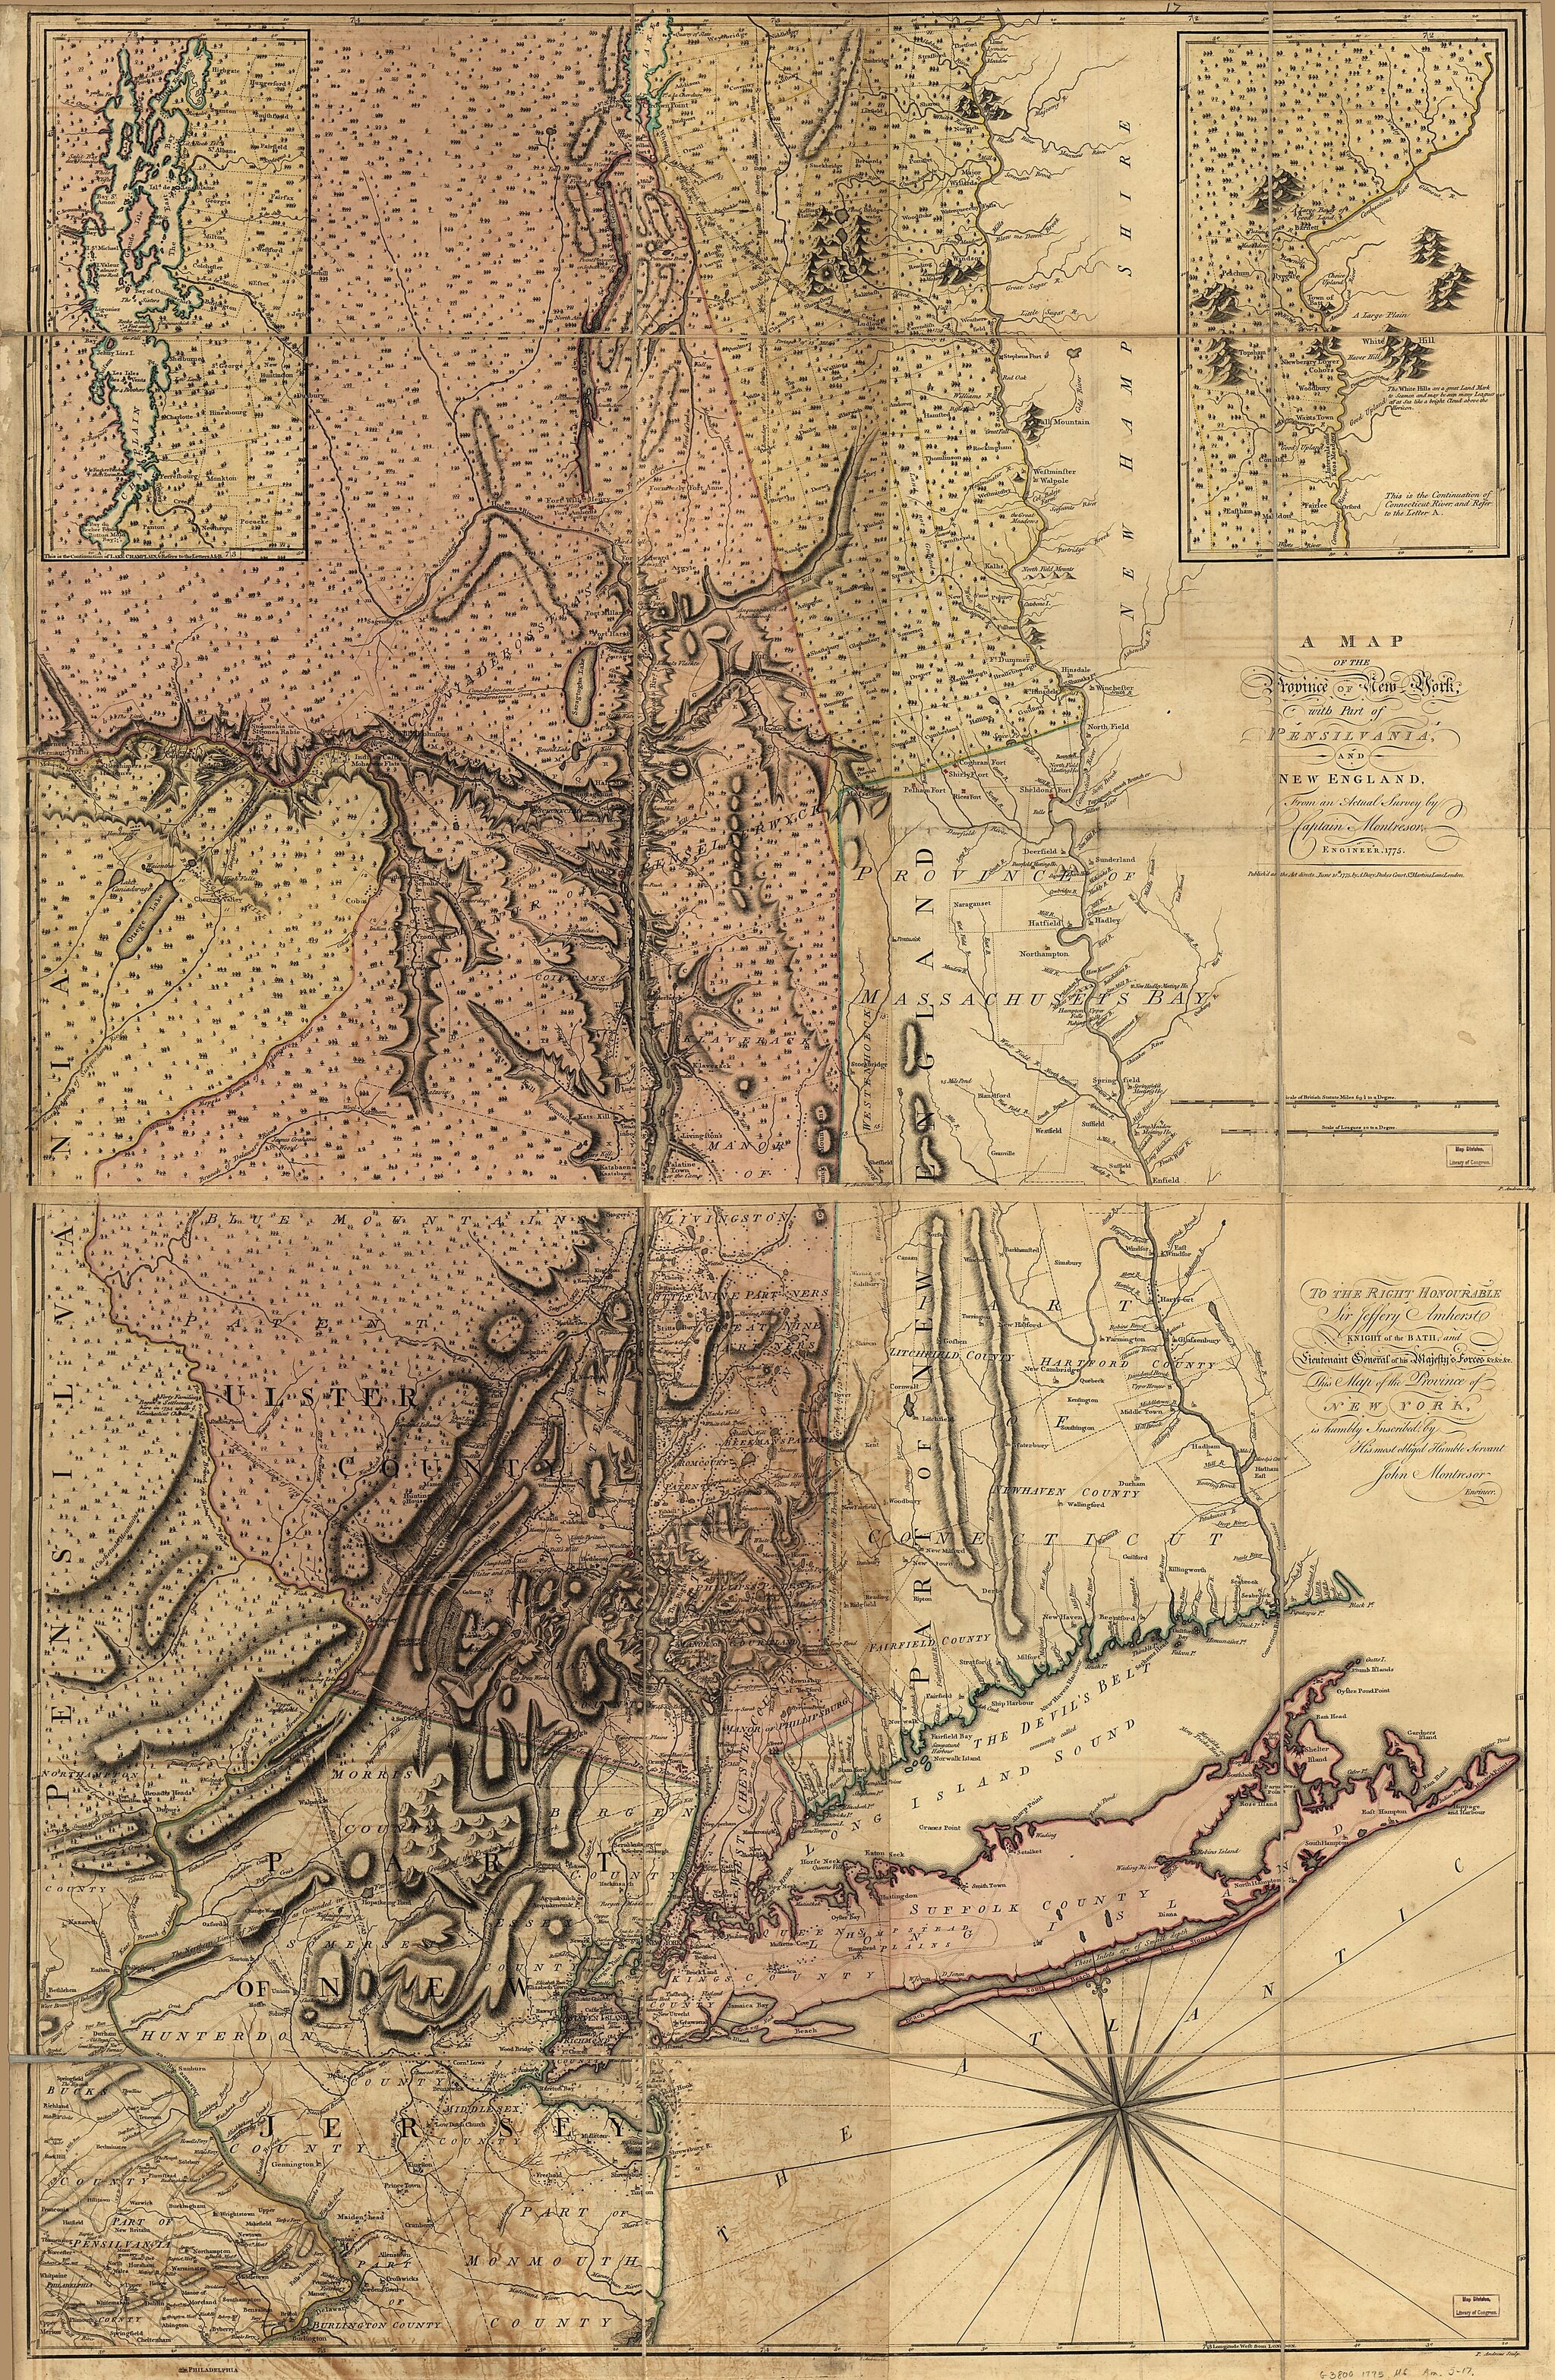 This old map of A Map of the Province of New York, With Part of Pensilvania, and New England from 1775 was created by Peter Andrews, Andrew Dury, John Montrésor in 1775